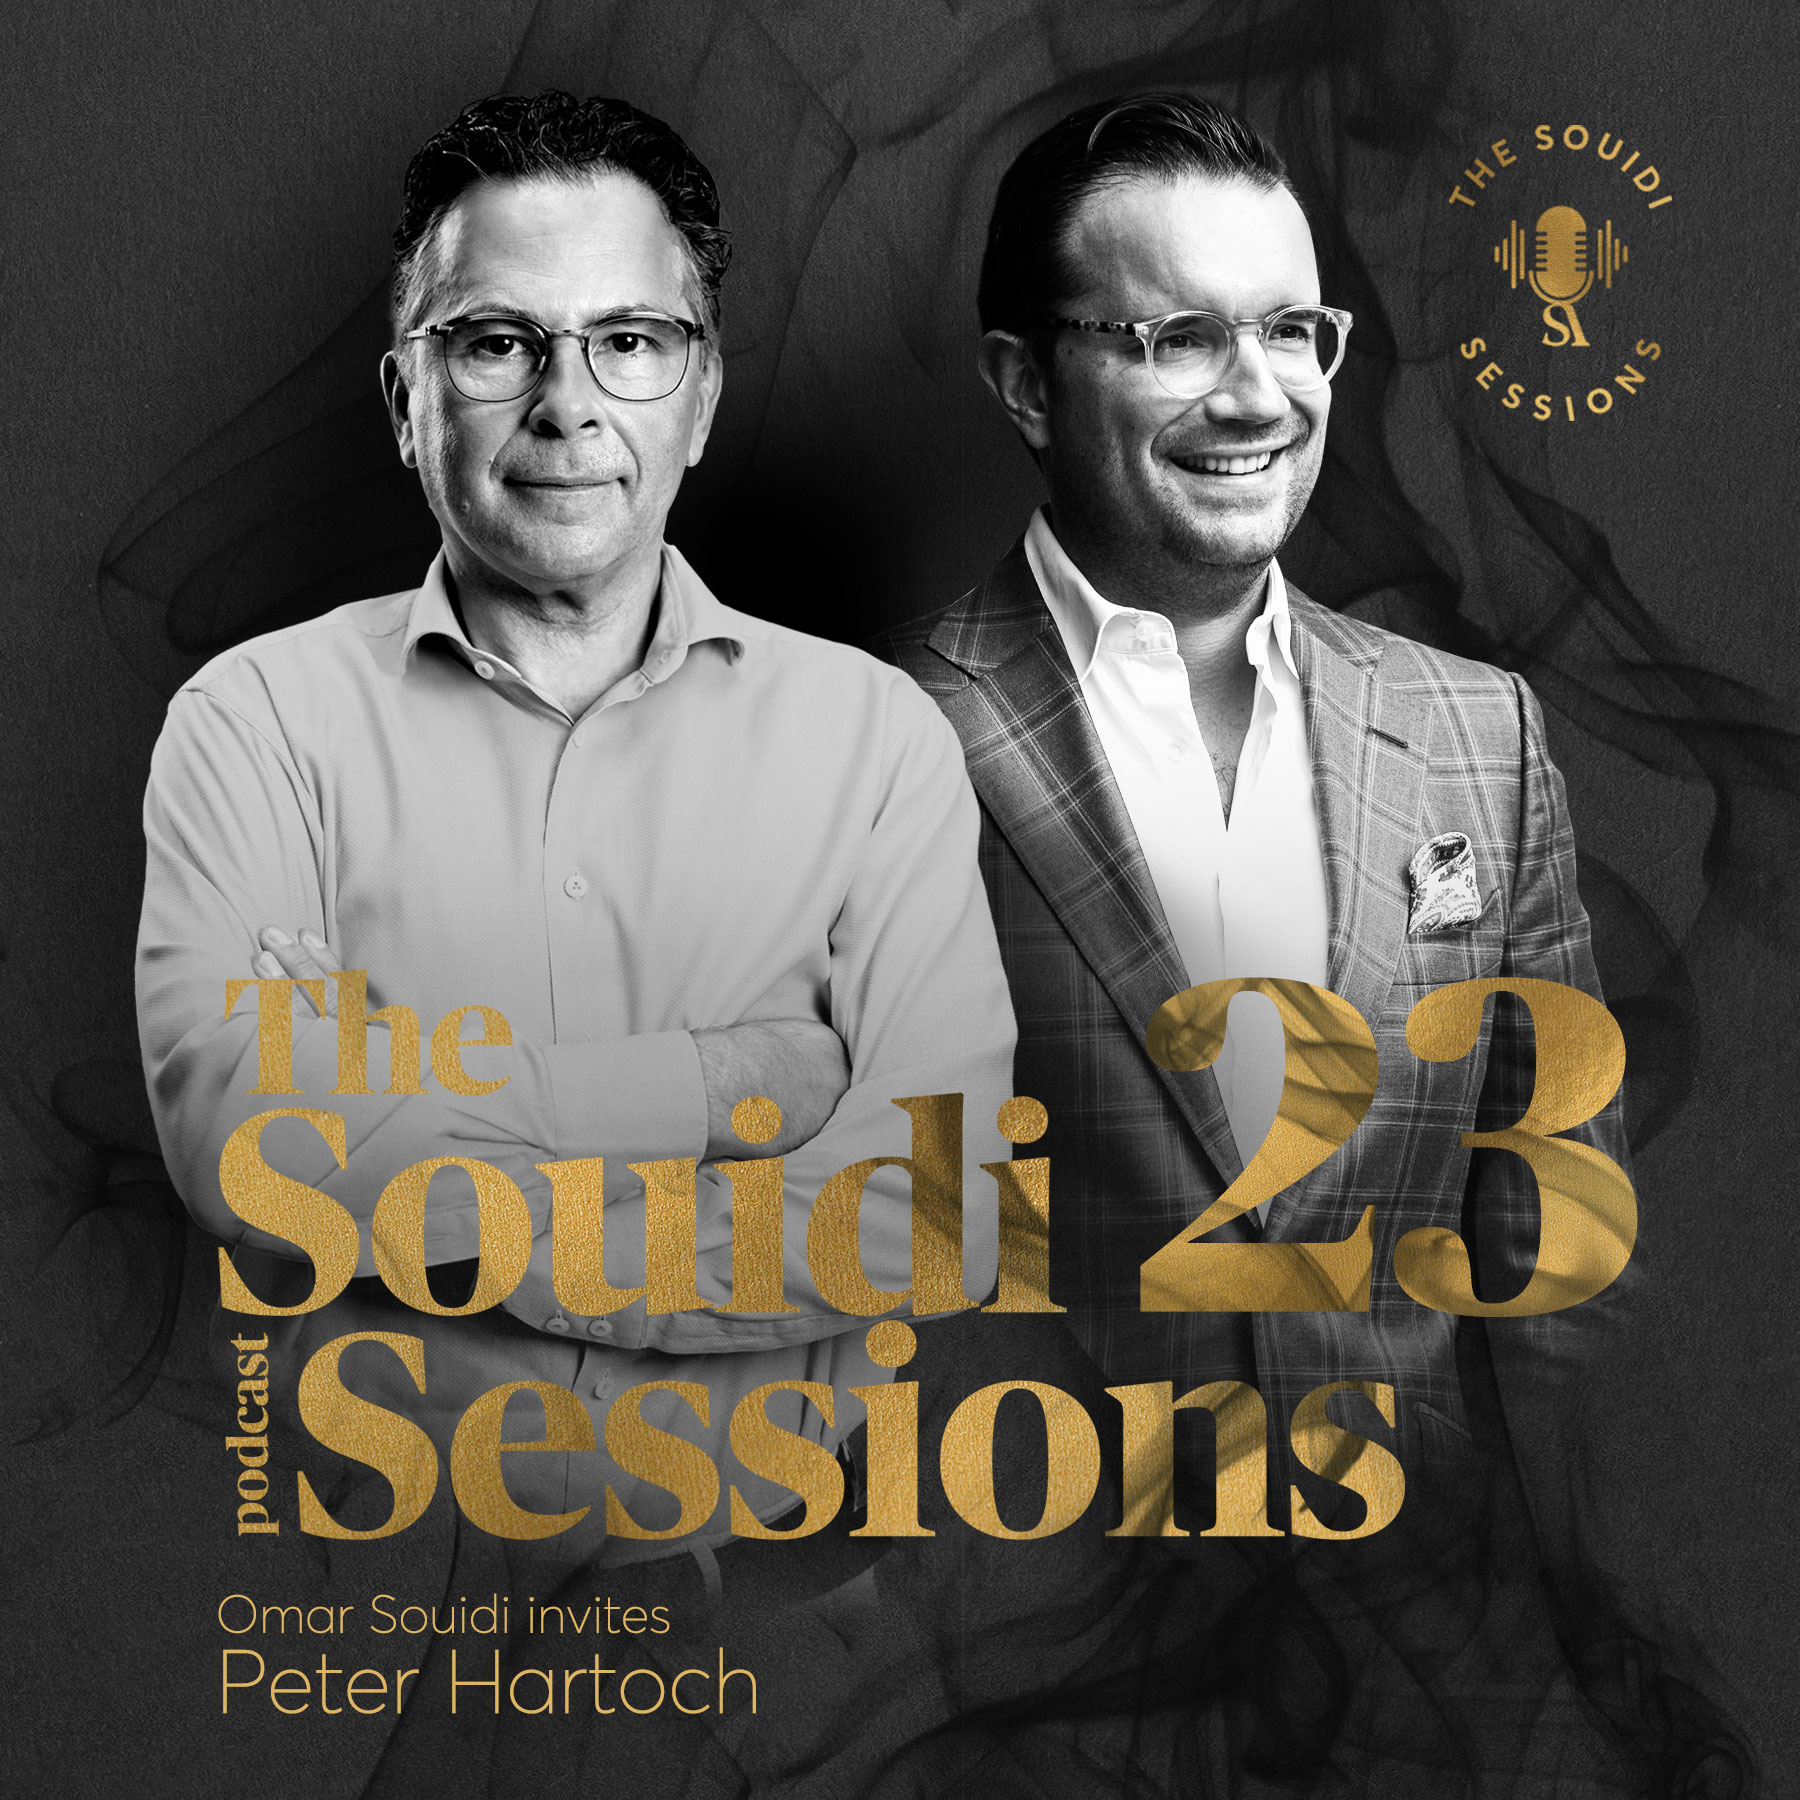 Souidi sessions met Peter Hartoch